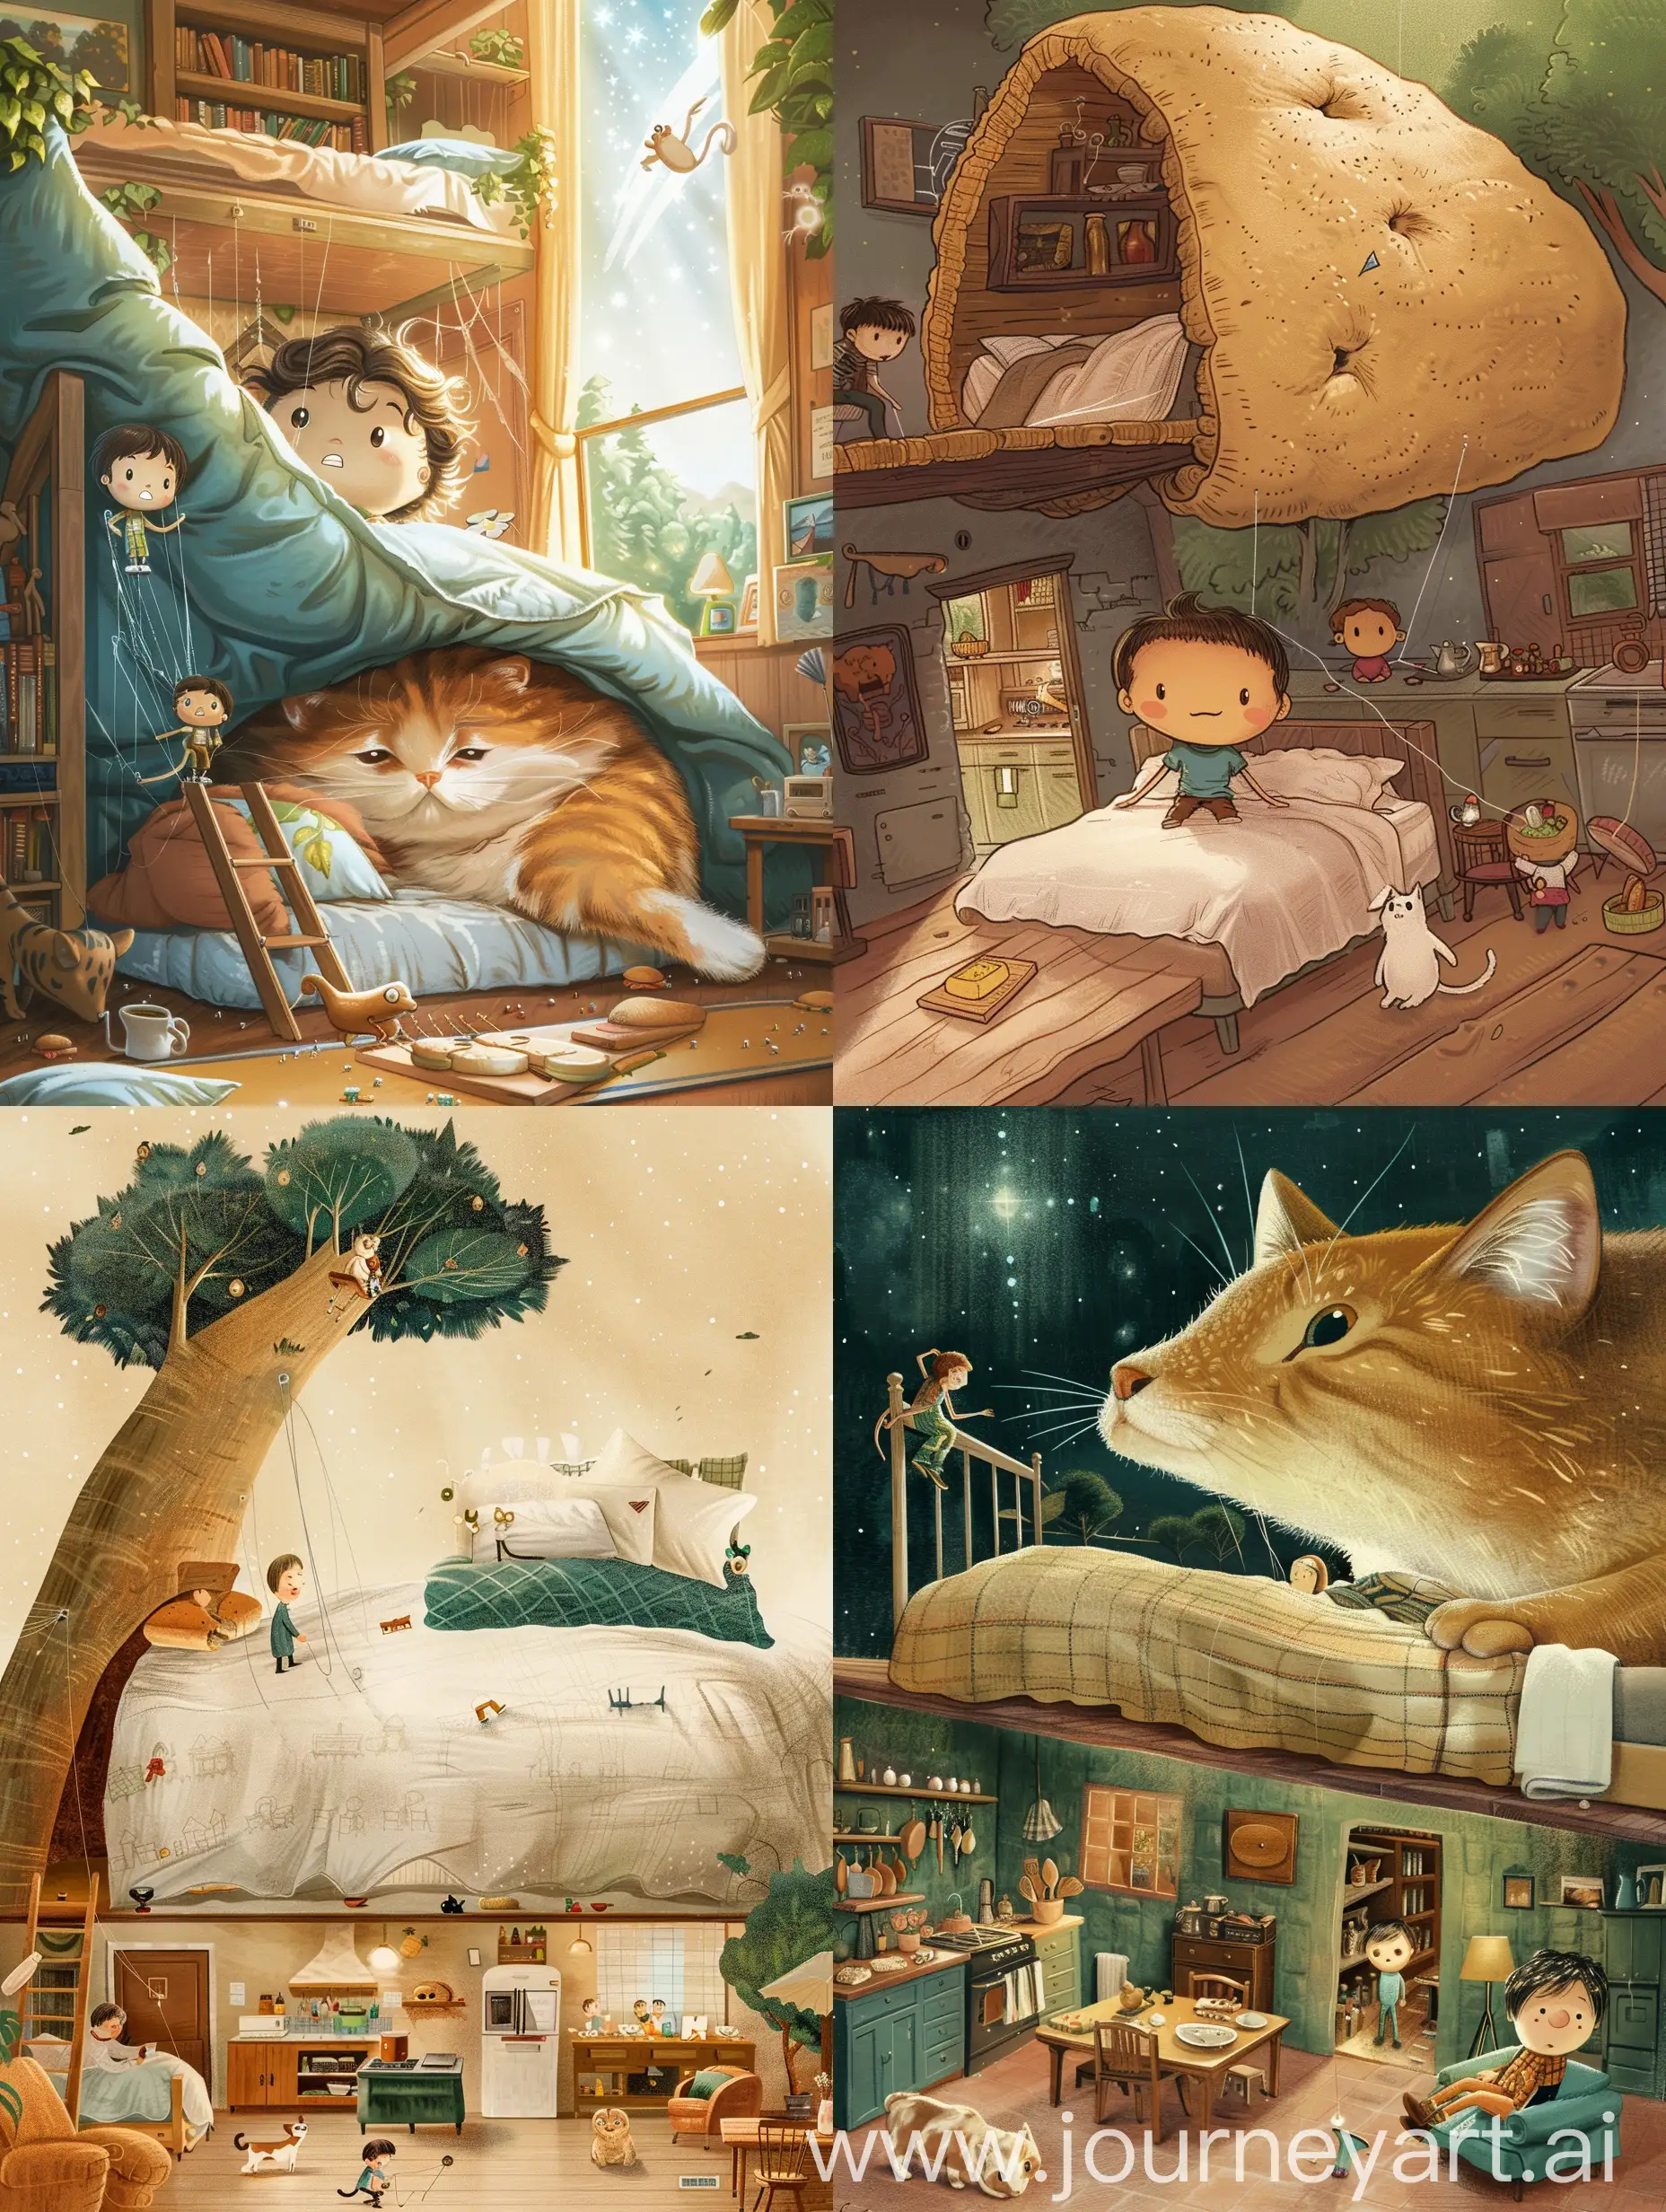 1. Morning of Wonder: The main character wakes up in the giant bed and looks puzzled at the giant furniture around him. The facial expression showed surprise.
2. Try to communicate: The protagonist tries to communicate with an indoor pet (like a cat that now looks huge), but the cat just looks at them curiously.
3. Mini Adventure: The protagonist uses thread and needle as climbing tools and struggles to get down from the bed. Demonstrate creative solutions and attention to detail.
4. Search for food: The protagonist explores the kitchen, trying to climb onto the table to find food. You can show them in comparison to a slice of bread, add humor.
5. Unexpected encounter: Under the table, the main character meets another mini man. The two smile at each other, heralding a new friendship and possible adventures.

6. Teamwork: The main character works with a new friend to build a small slide that makes it easy to slide from the table to the ground.
7. Pet Riding adventure: They get on a pet (cat or dog) and ride through the "jungle" (living room of the house), which is full of action and fun.
8. Discover a New World: In a corner of the living room, they discover an entrance to a community of mini-people, suggesting a world they didn't know existed before.
9. Joyous party: The main character and new friends attend a small party of the Mini people community, showcasing a variety of miniature food and entertainment.
10. Under the stars at night: The story ends with the main character and his new friends sitting on a windowsill, looking up at the stars, leaving him looking forward to future adventures.